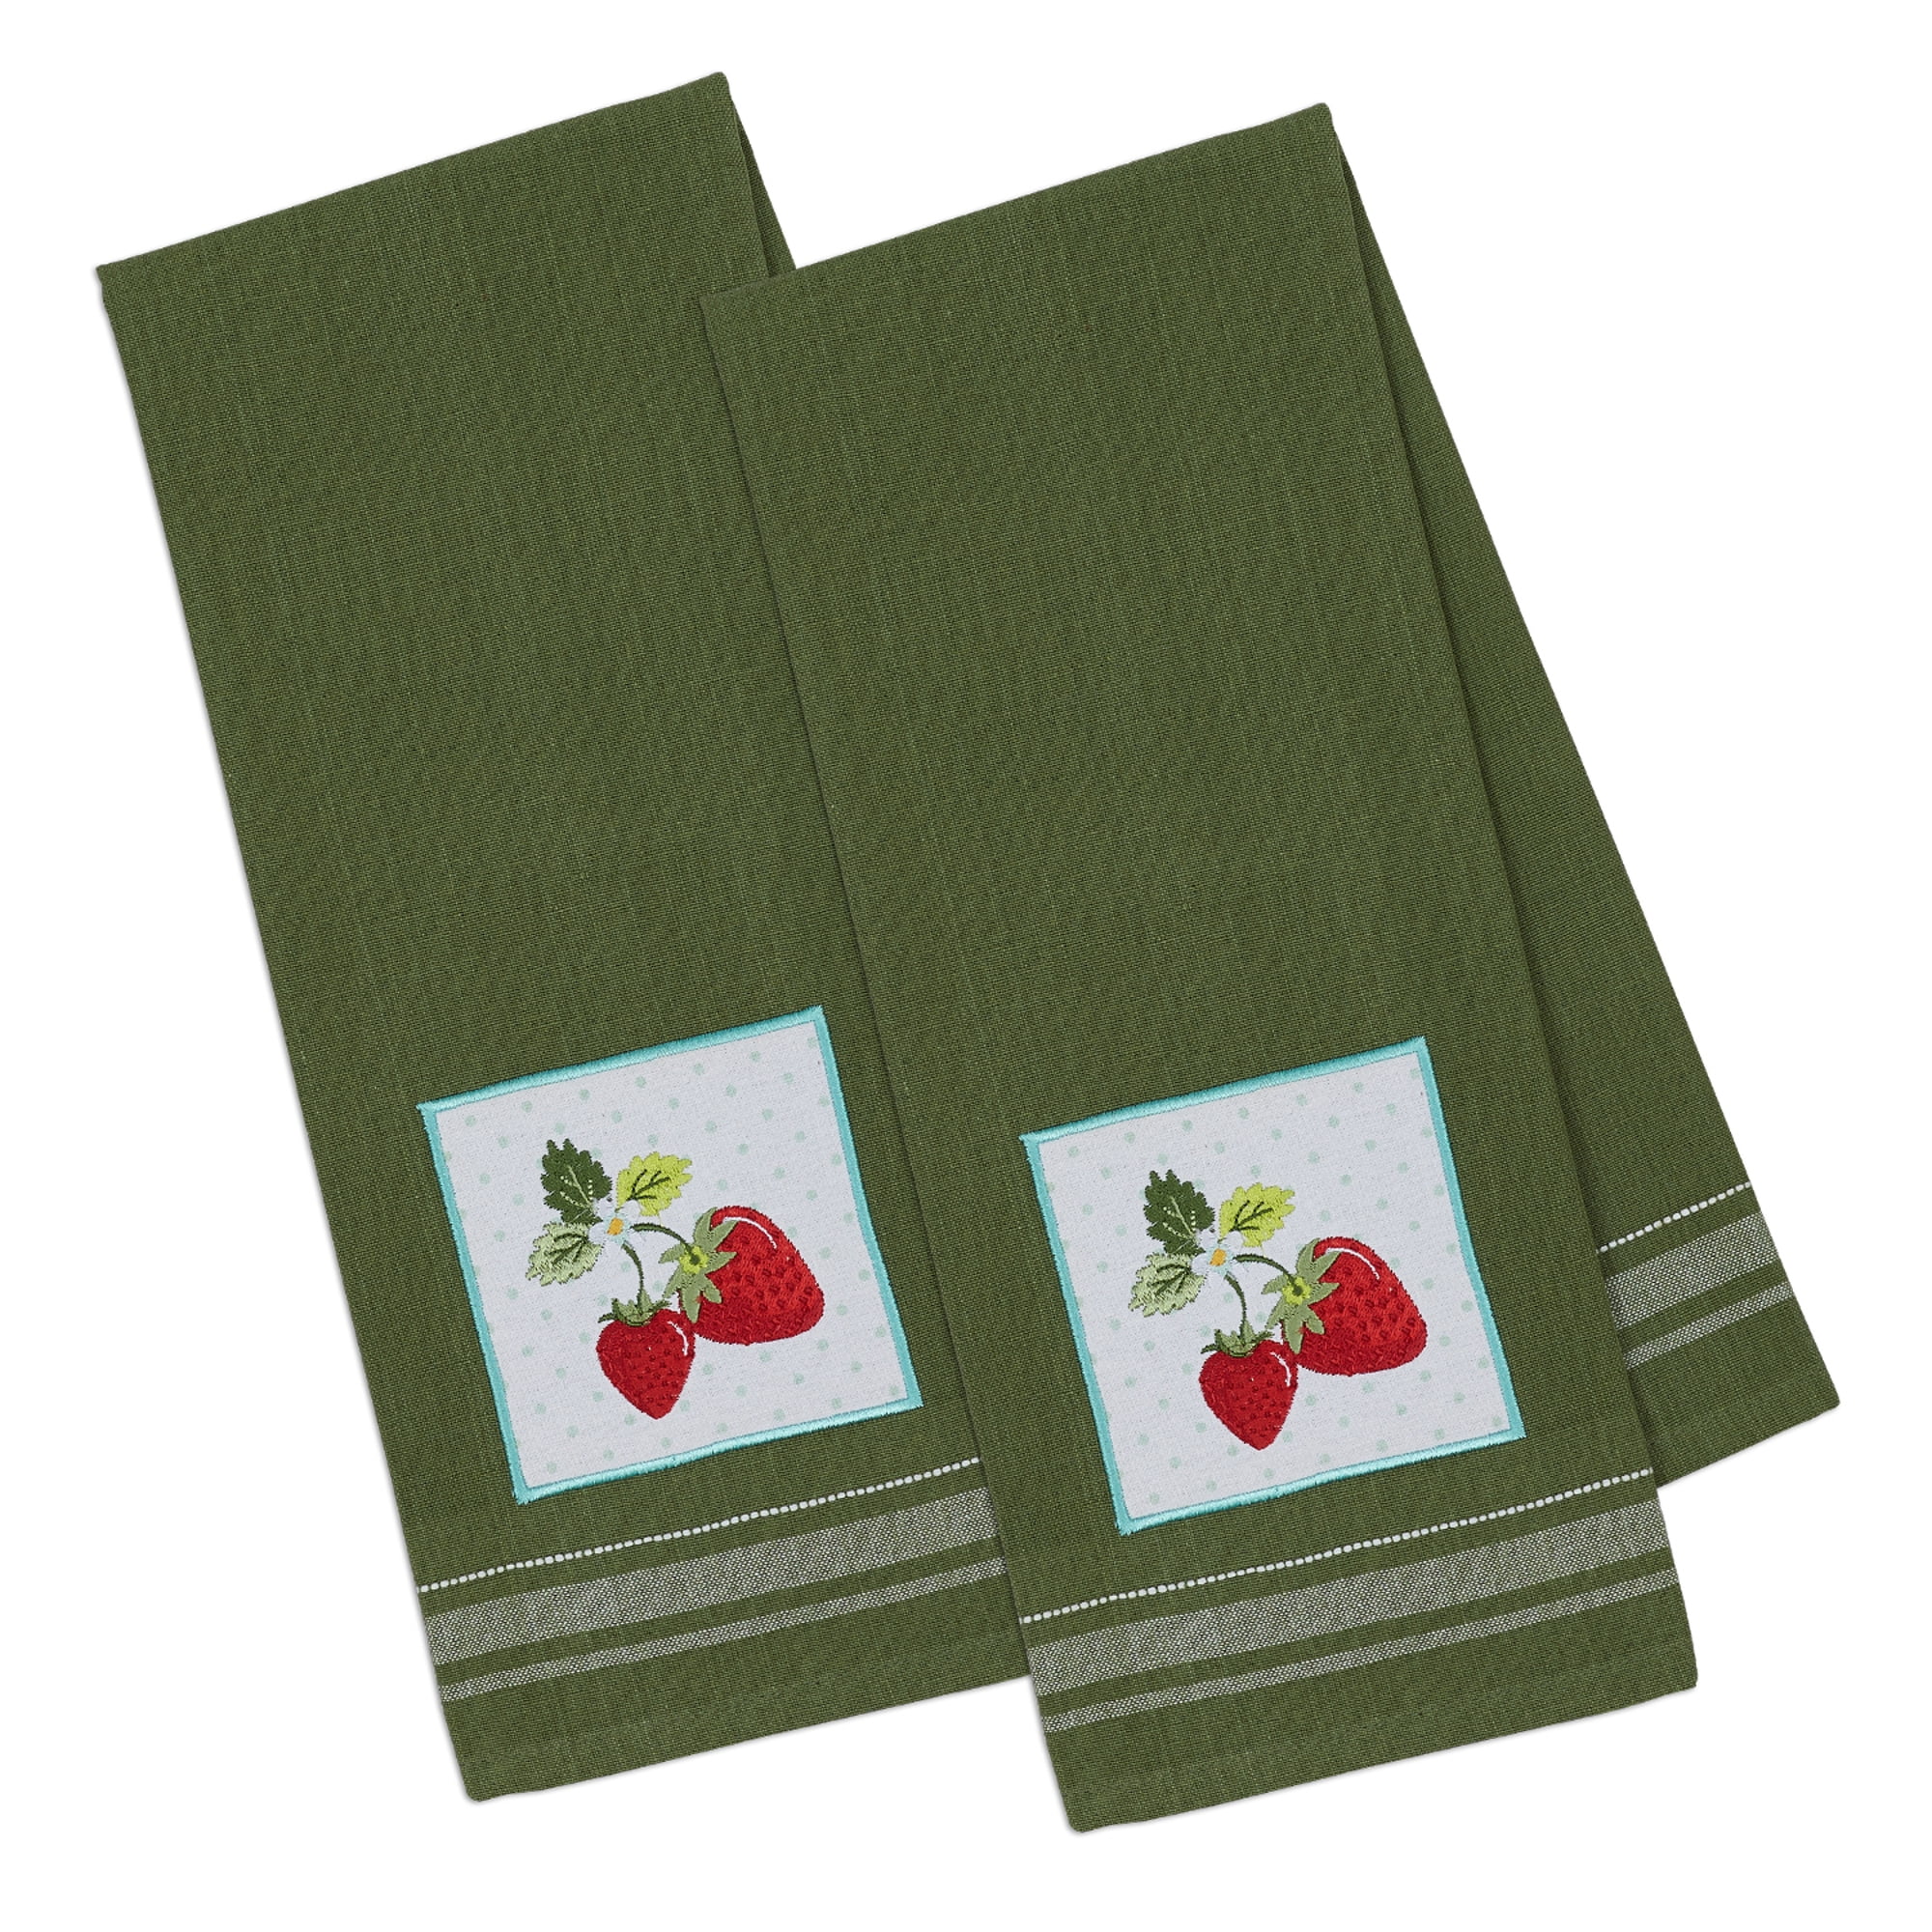 Recipe Towel, Bar Towels, Embroidered Kitchen Towel, Strawberry